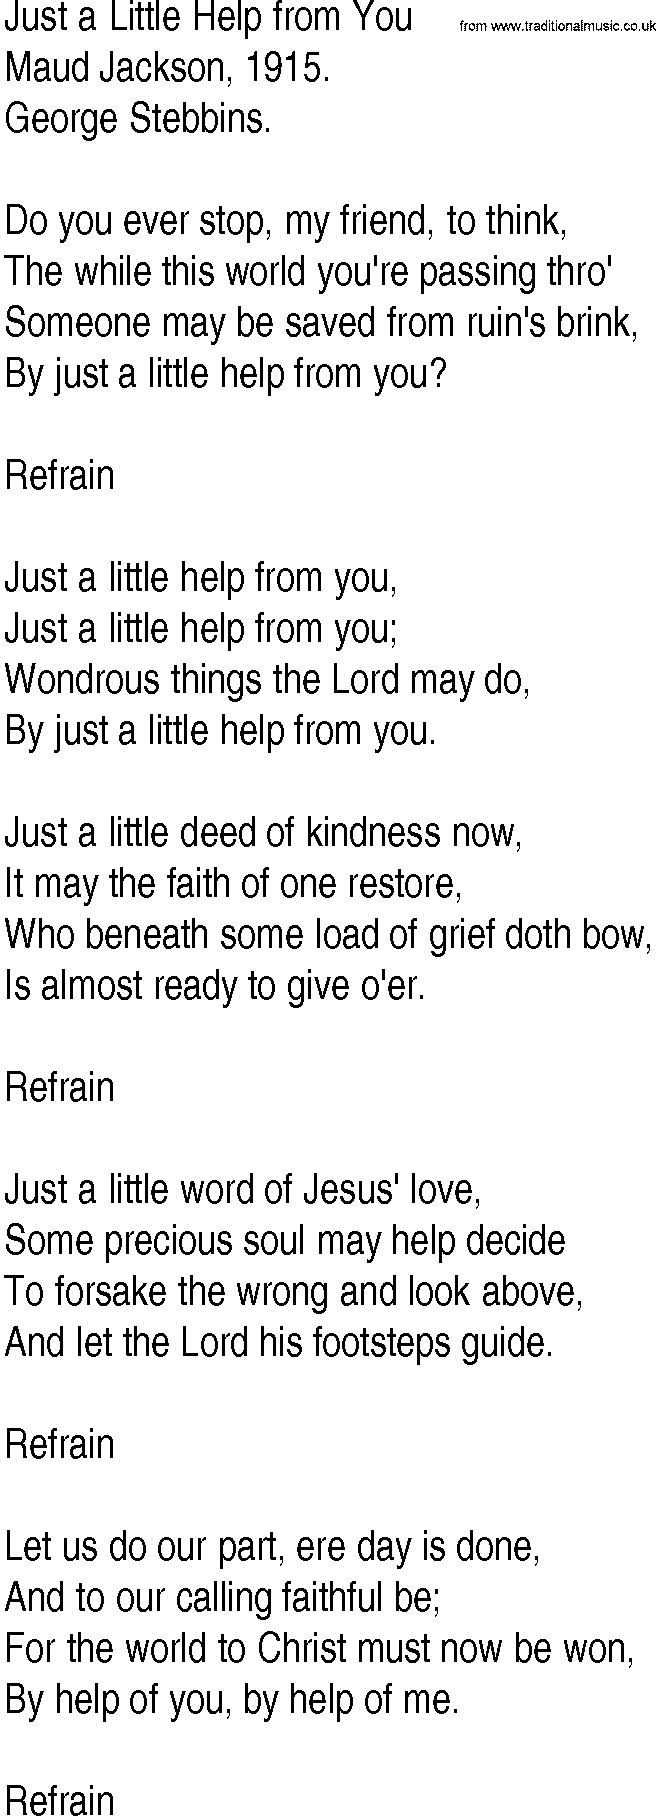 Hymn and Gospel Song: Just a Little Help from You by Maud Jackson lyrics